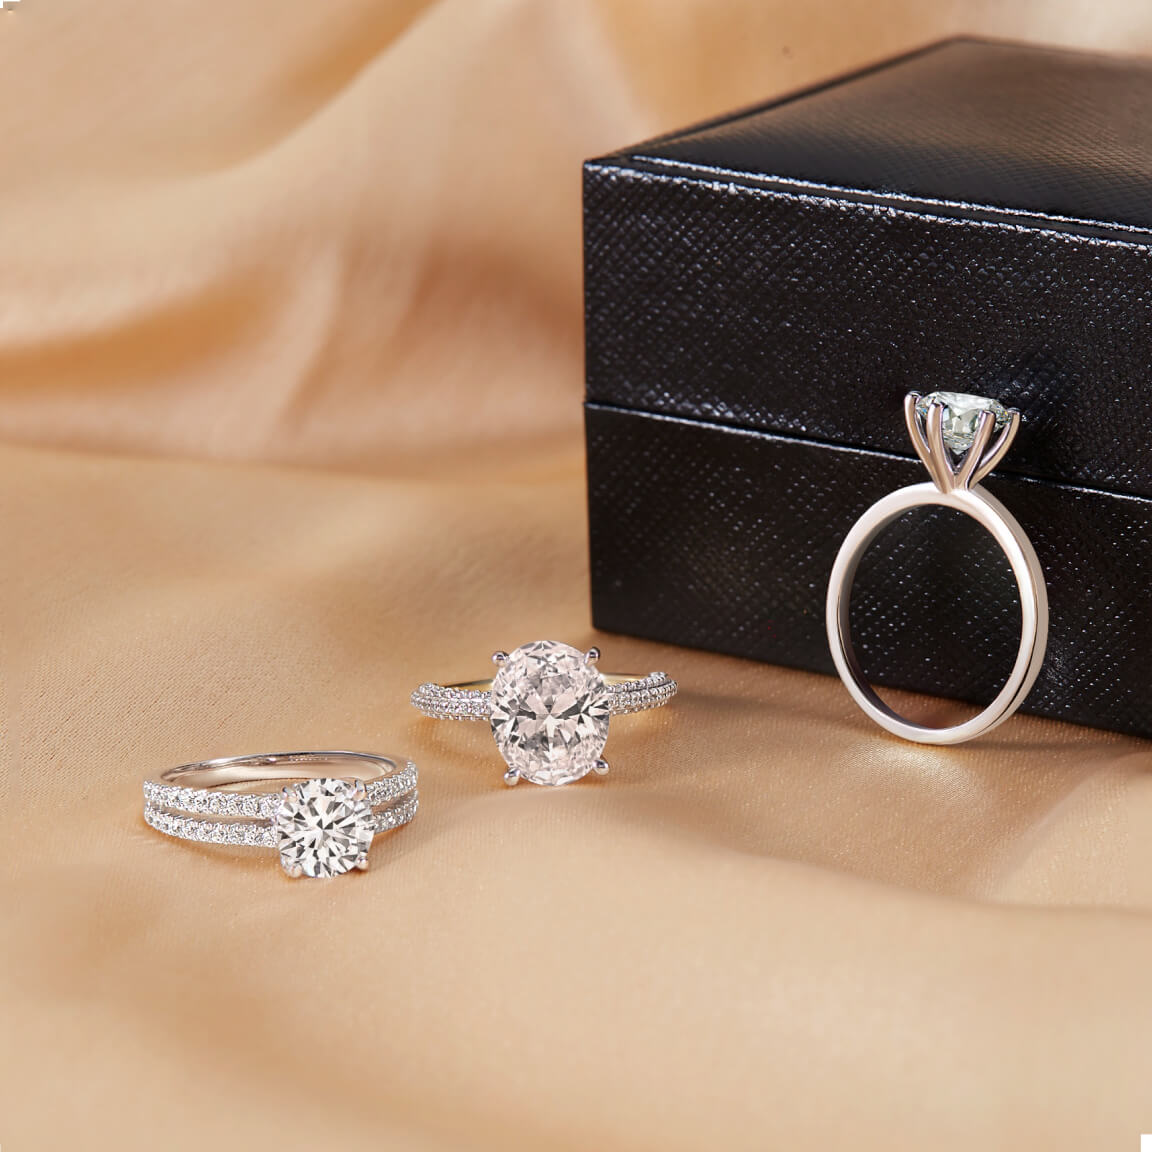 Tired Of Window Shopping? Here’s Where To Buy Gorgeous Engagement Rings Online